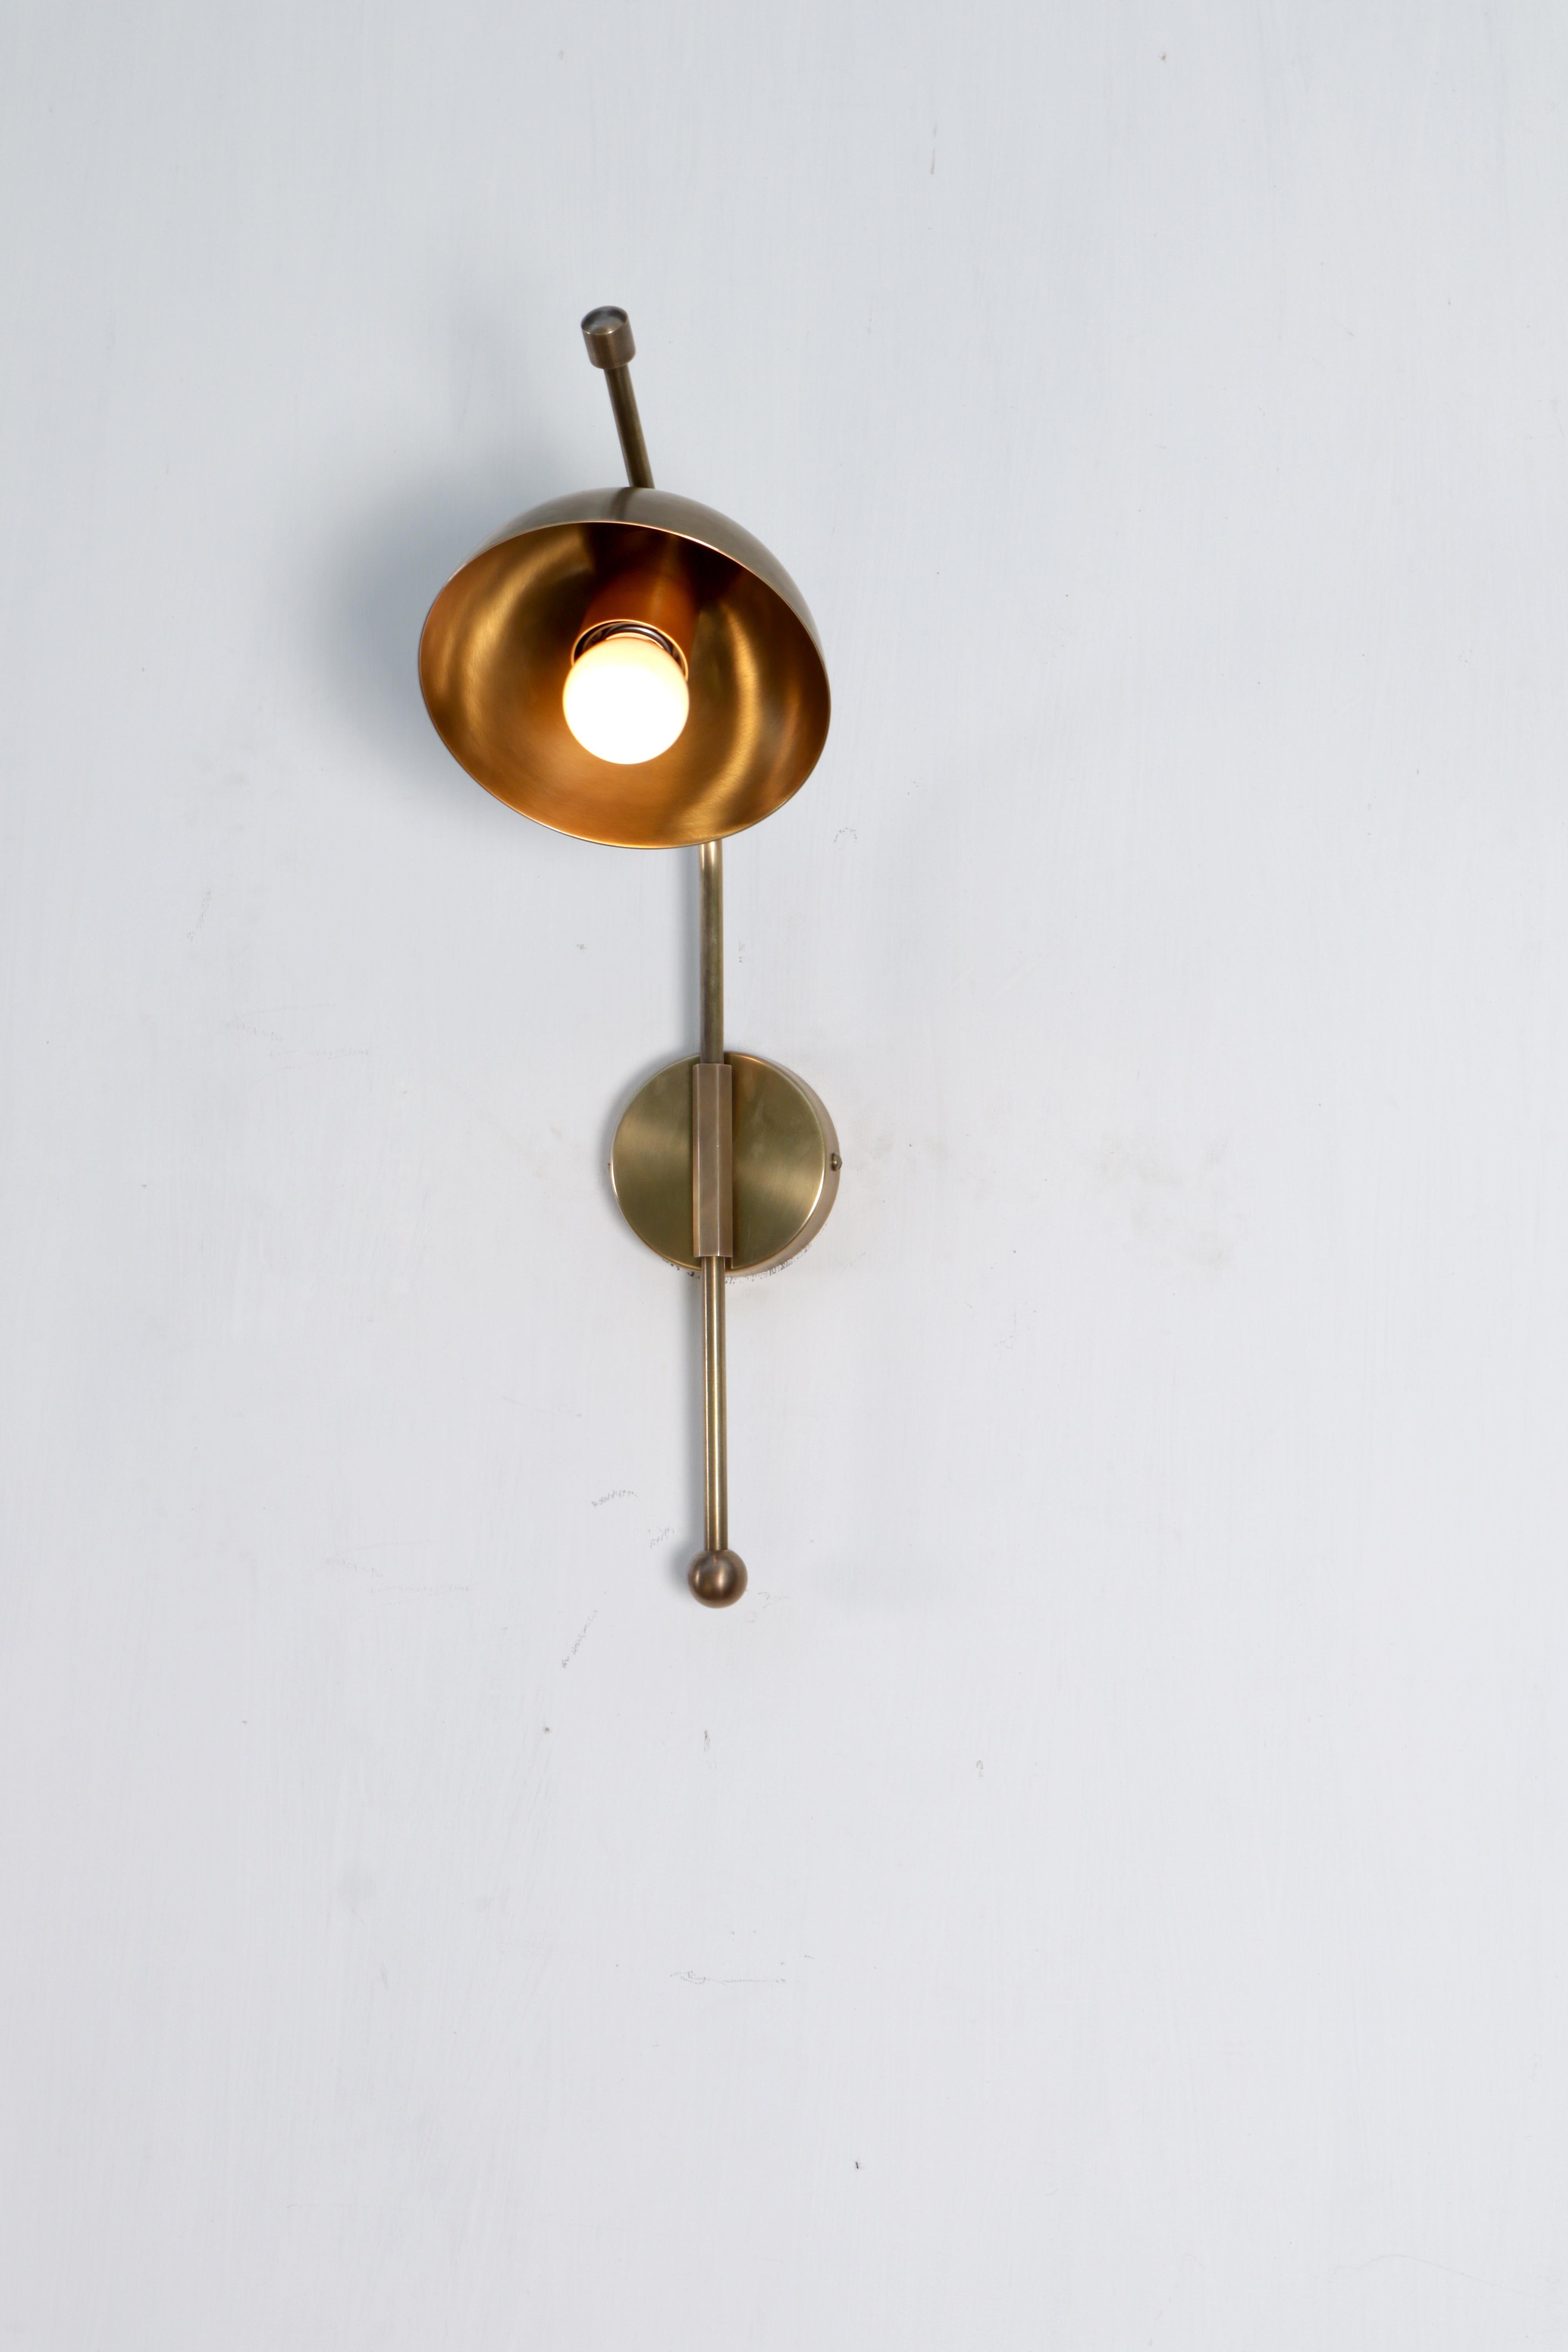 Wing Two Brass Dome Wall Sconce by Lamp Shaper
Dimensions: D 15.5 x W 24 x H 51 cm.
Materials: Brass.

Different finishes available: raw brass, aged brass, burnt brass and brushed brass Please contact us.

All our lamps can be wired according to